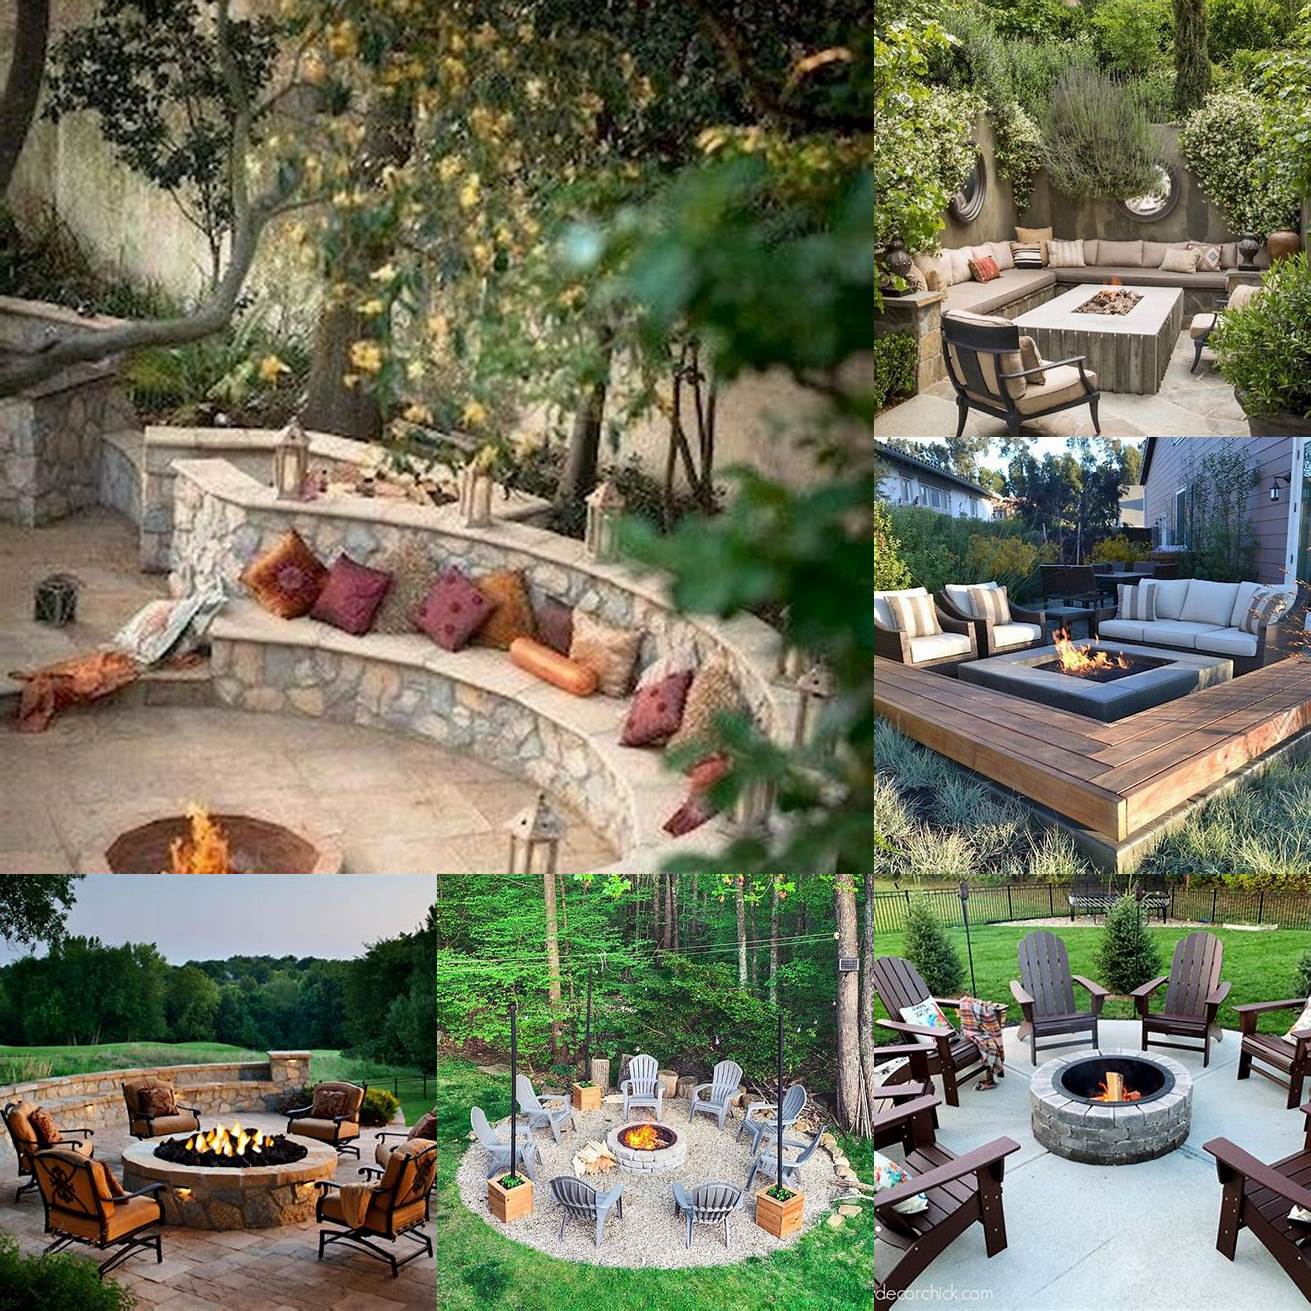 Cozy seating area with fire pit